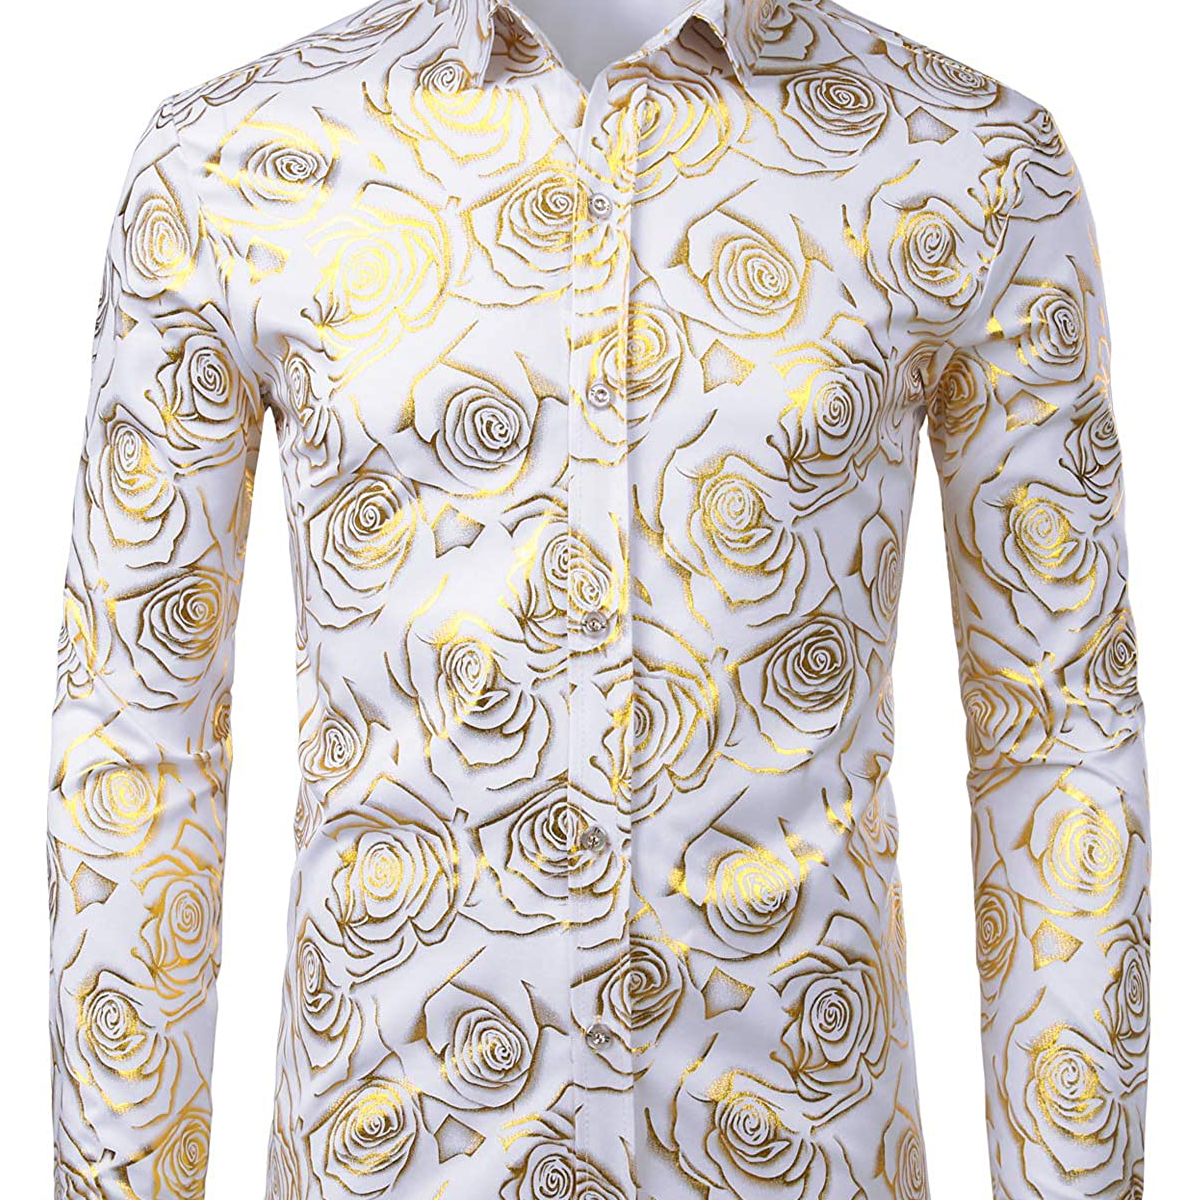 Men's Floral Print Long Sleeve Casual Button Up Shirt